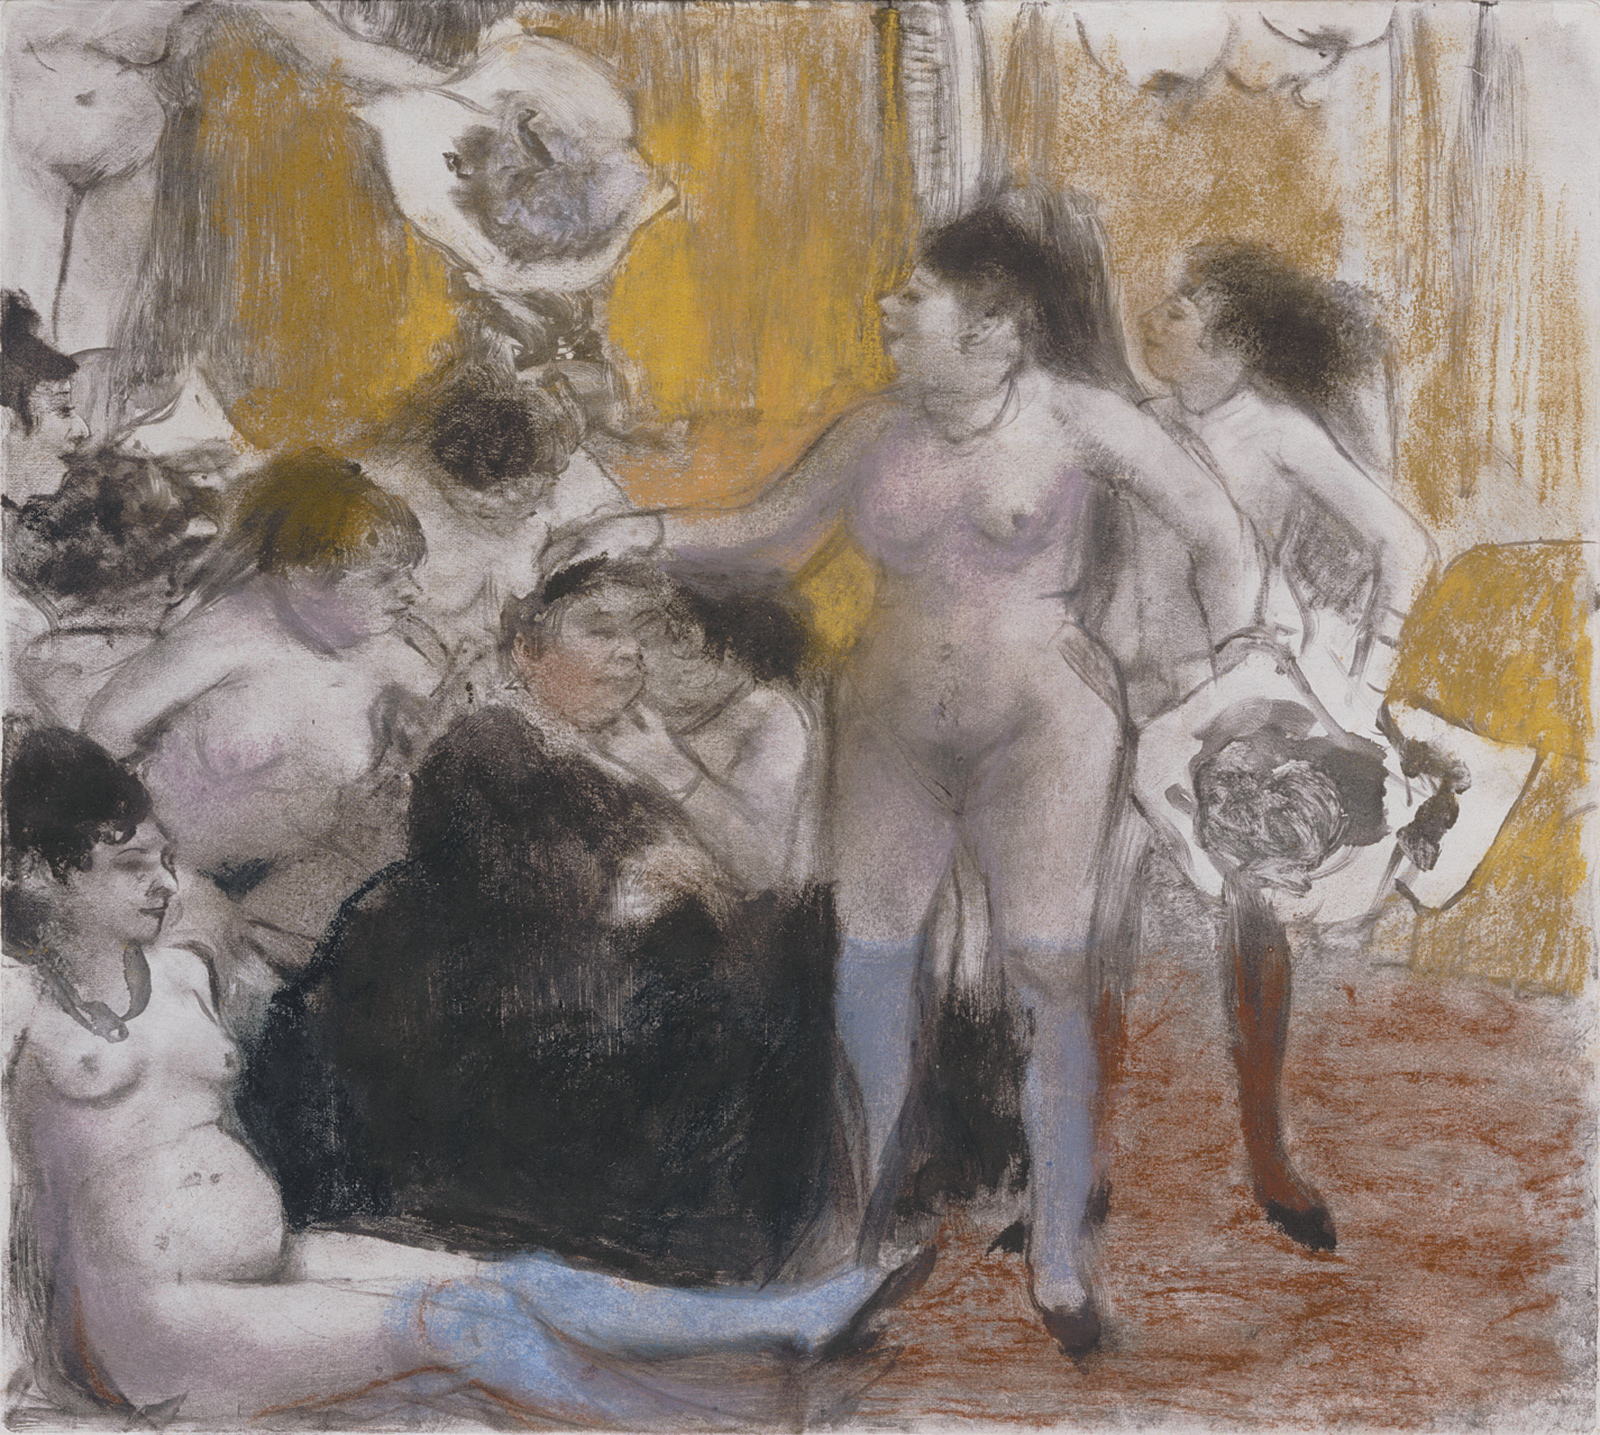 Edgar Degas: The Name Day of the Madam, pastel over monotype on paper, circa 1877–1879